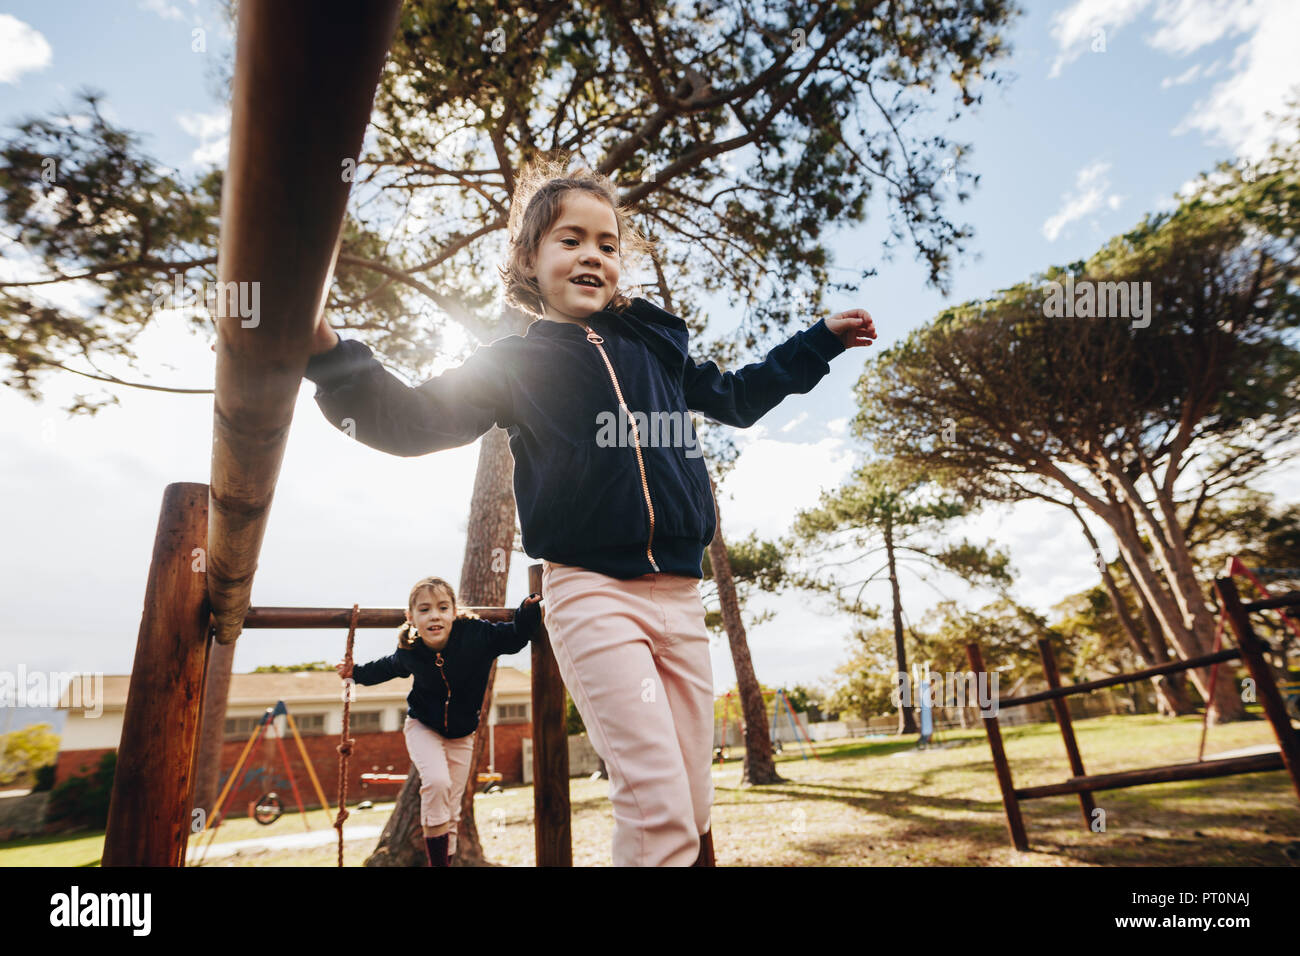 Cute little girl with her twin sister playing at playground outdoors on sunny day. Twin girls playing at the public park. Stock Photo